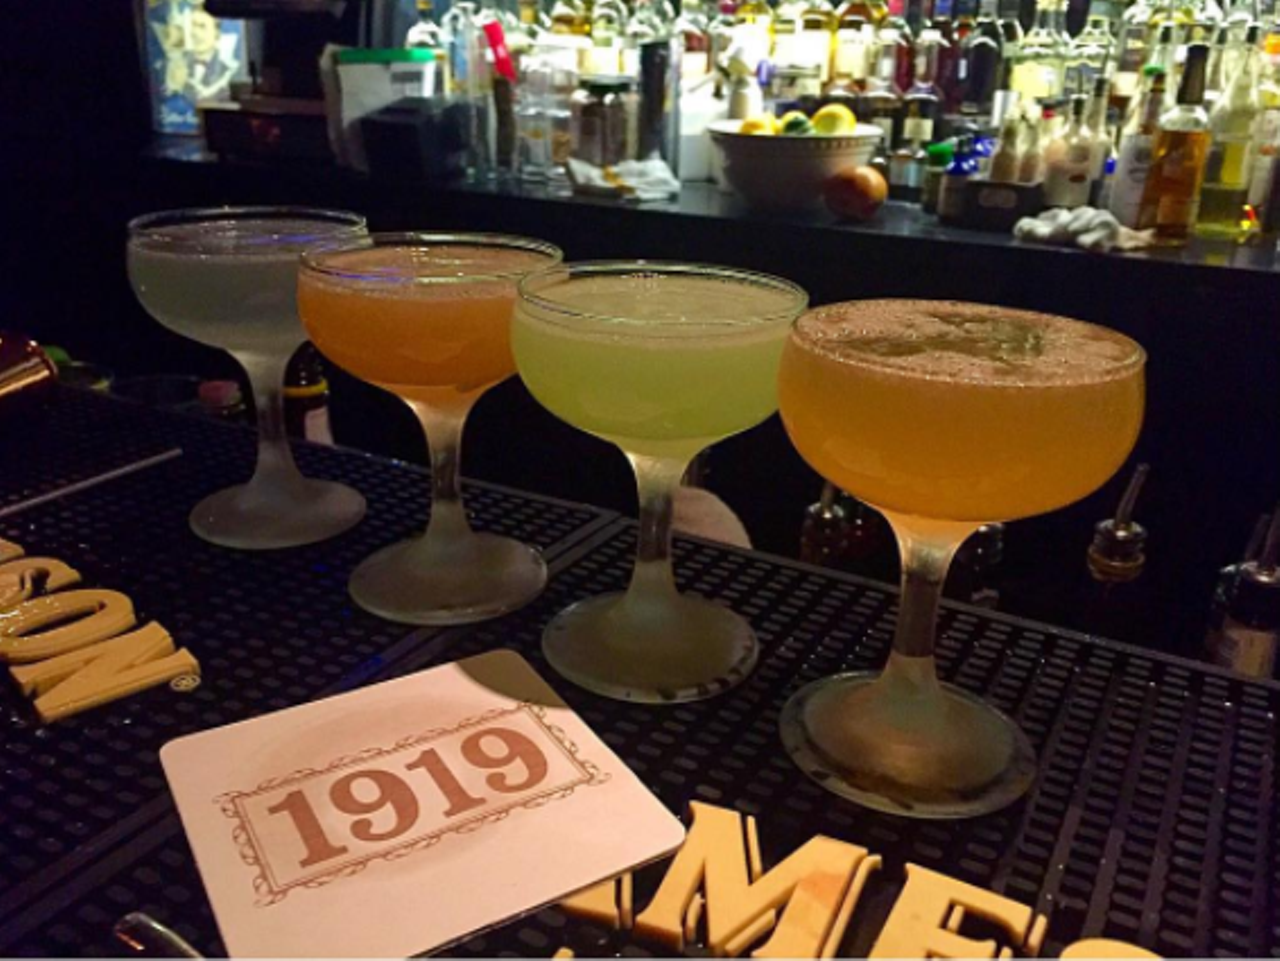 Bar 1919
1420 S. Alamo St., (210) 227-1420, bar1919
Think about how much money the bar saves by keeping the setting dim and almost spooky...Grab a Scotch and ponder the meaning of life while there. 
Photo via Instagram, heygirlfisher